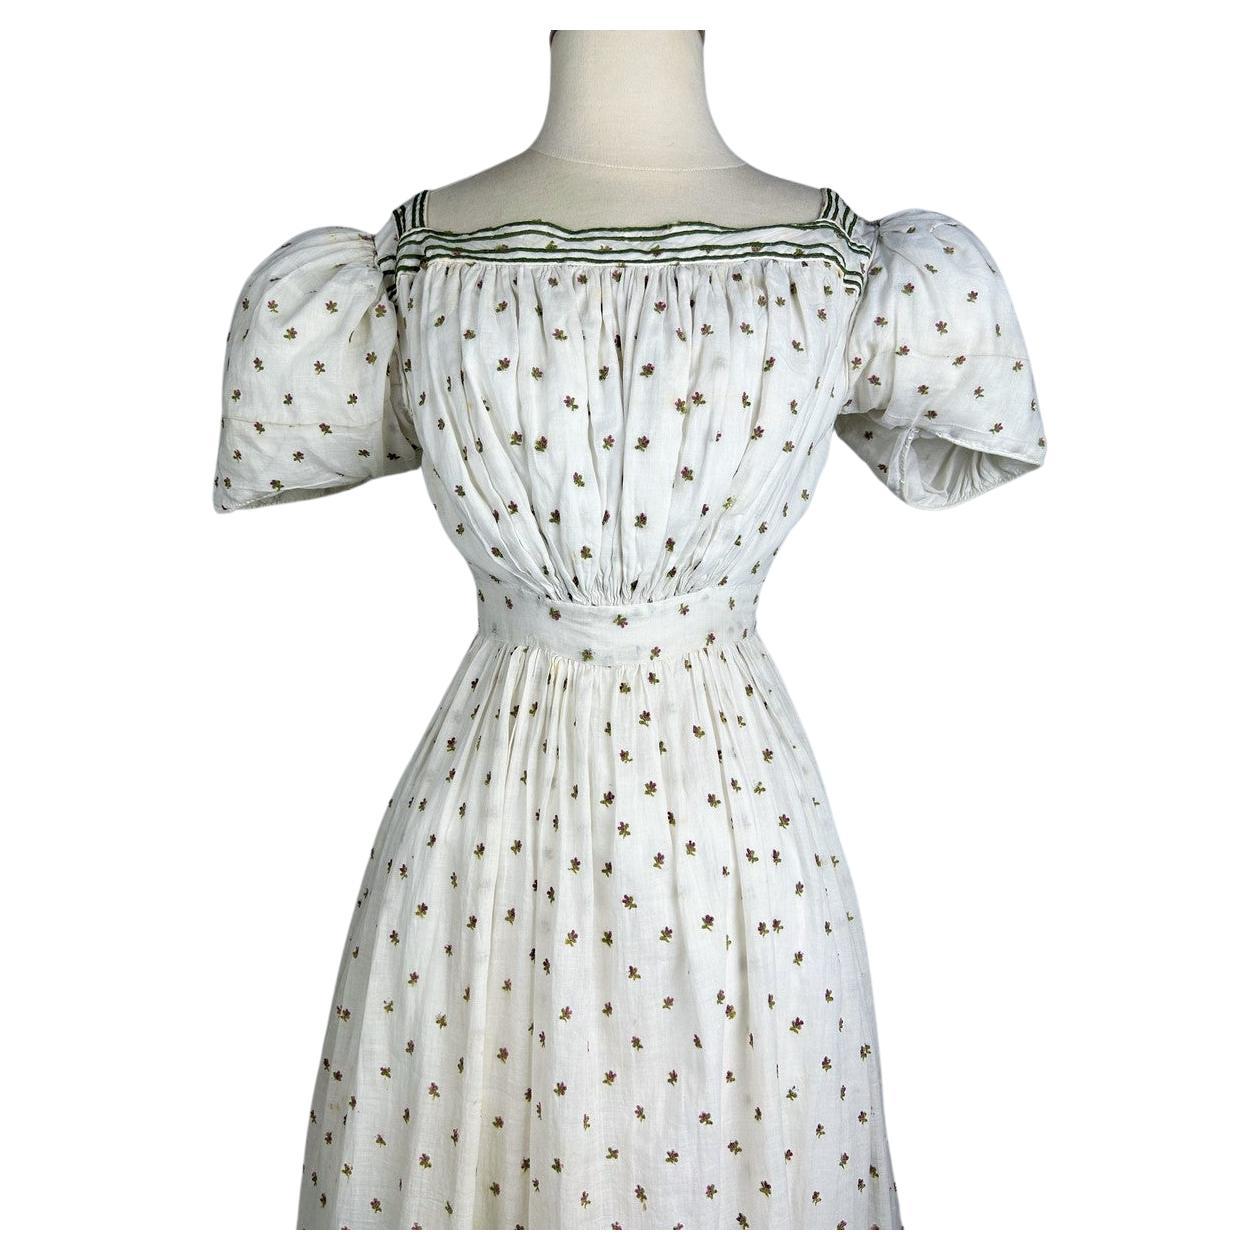 Circa 1820-1825
England or Europe

Interesting summer dress in cotton muslin embroidered with wool circa 1820/1825 from the late Regency period in England. It is reminiscent of the work of Jane Austin.  Bustier with large square neckline applied